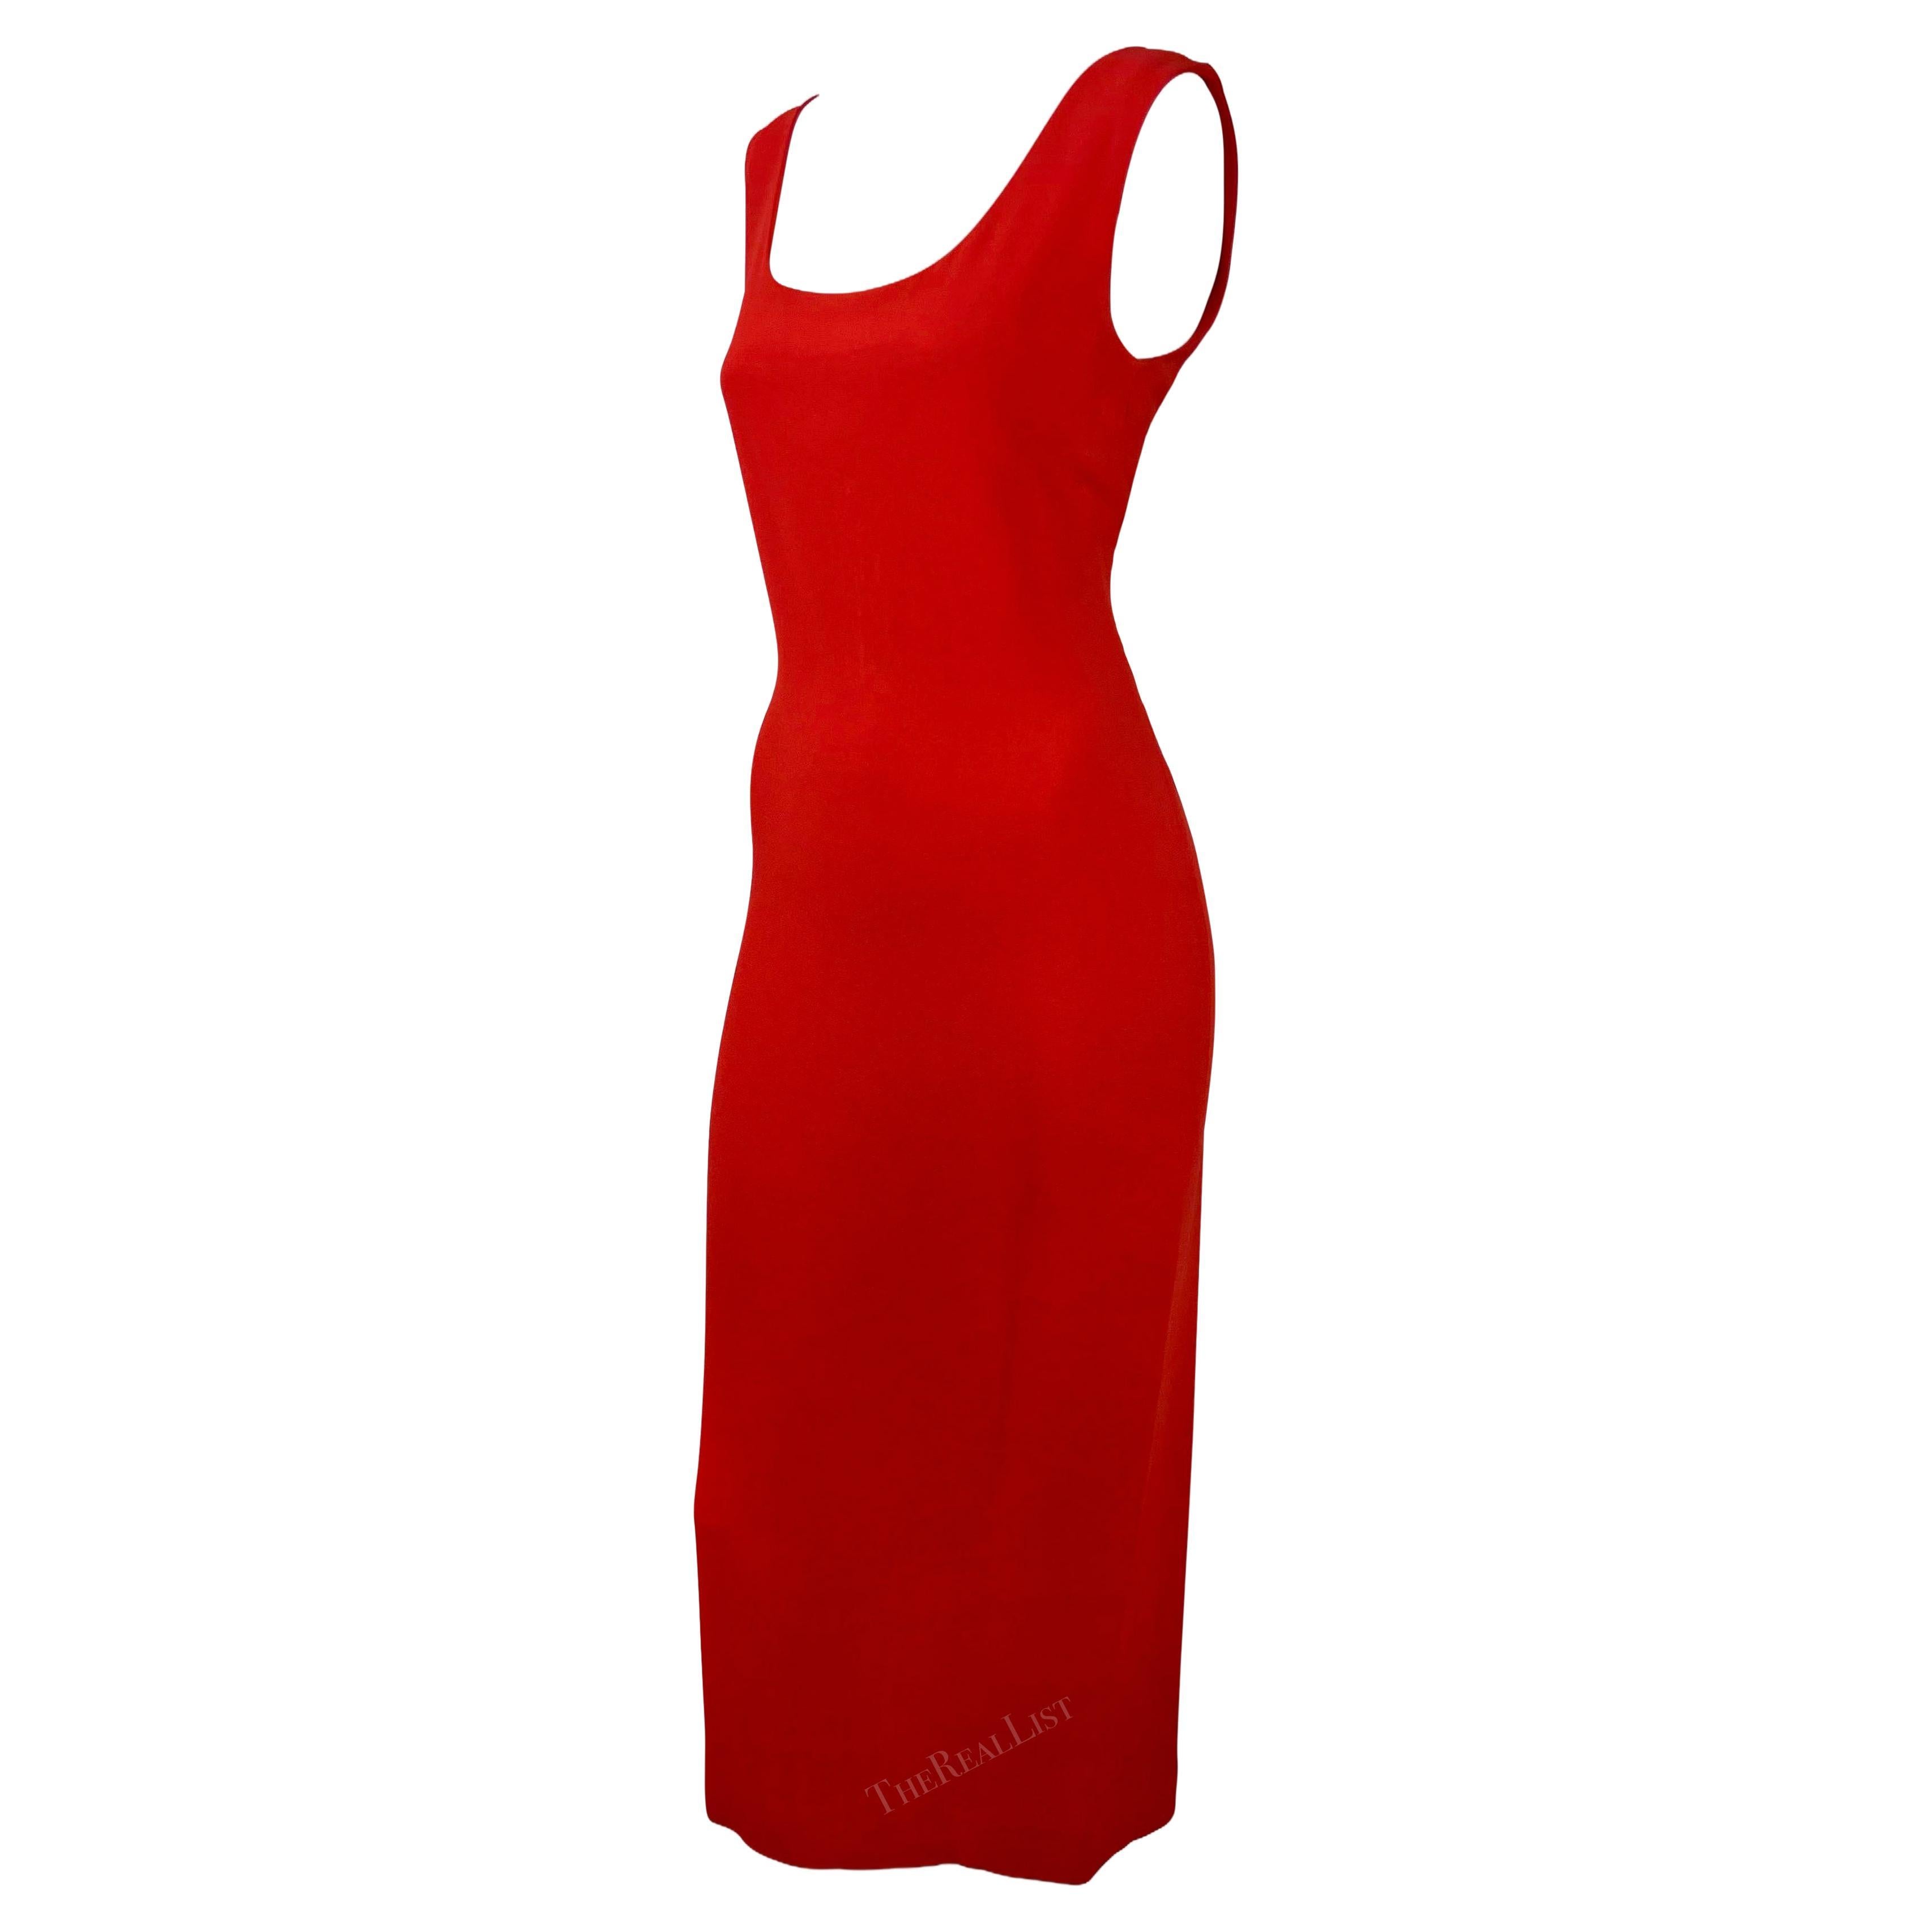 S/S 1993 Gianni Versace Runway Ad Red Plunging Back Sleeveless Dress In Excellent Condition For Sale In West Hollywood, CA